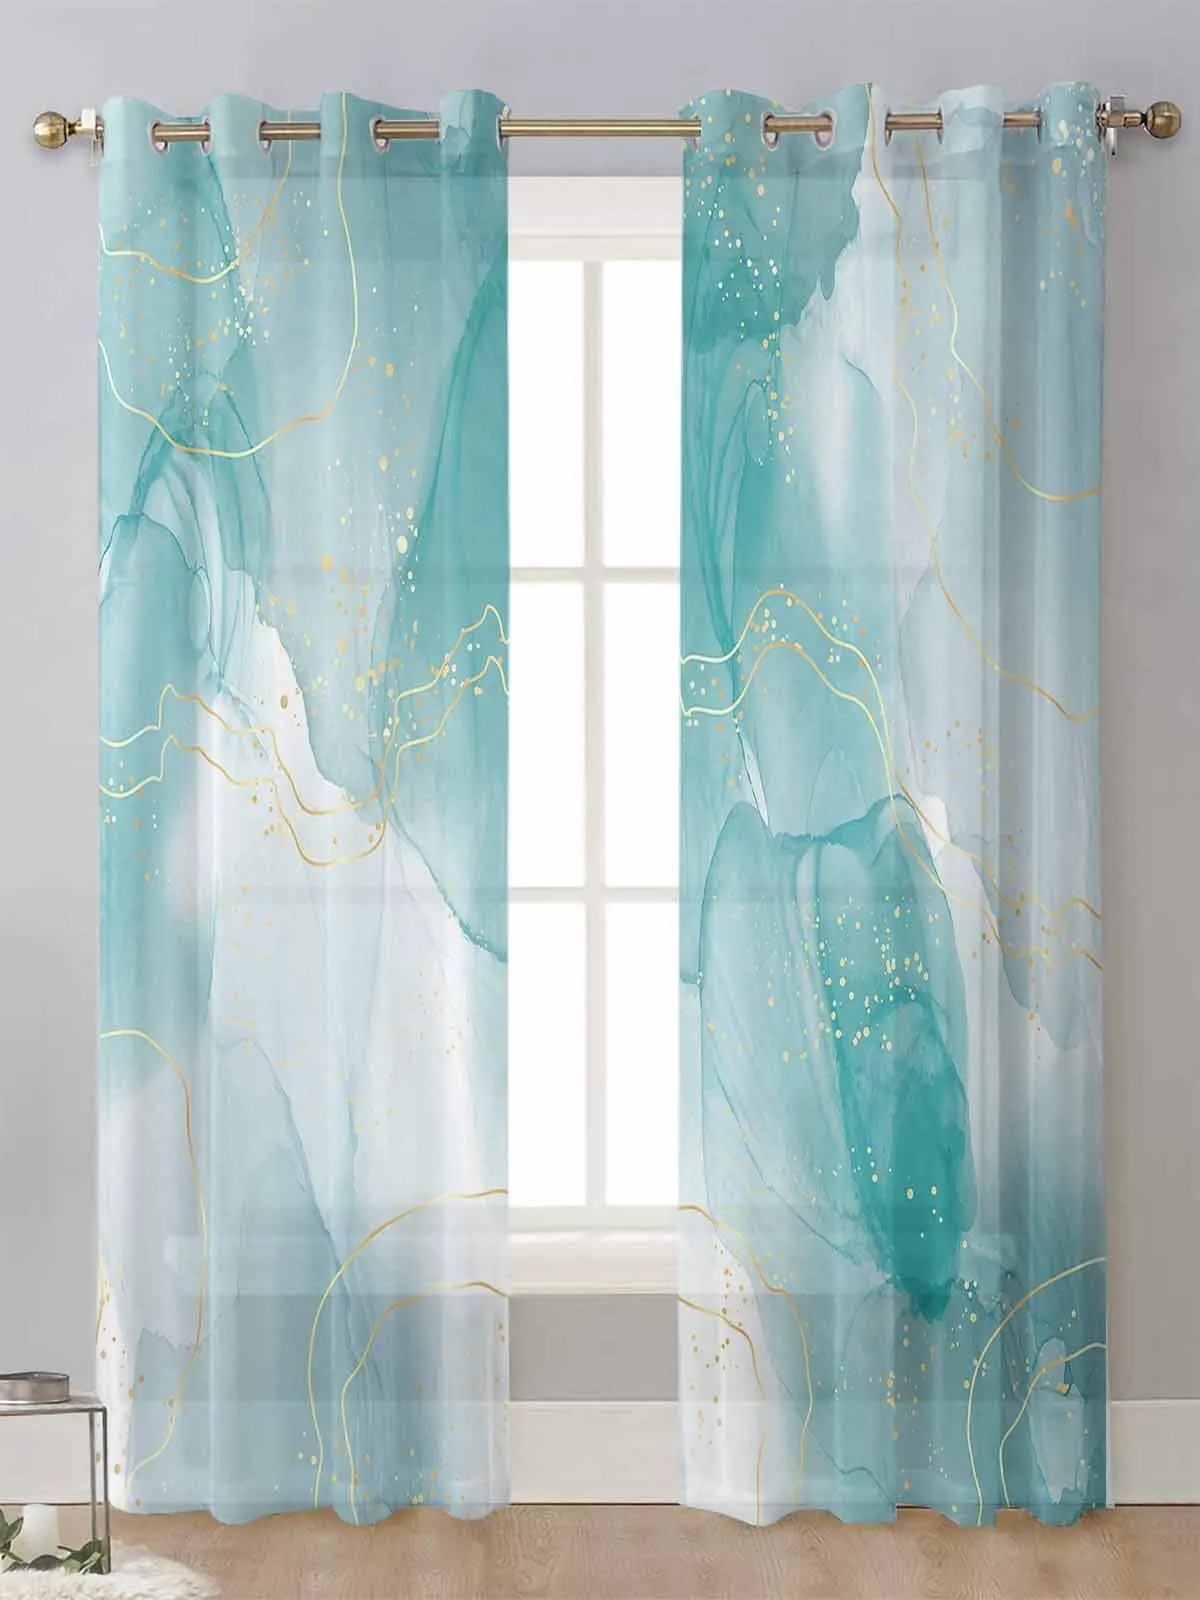 

Marble Line Aqua Green Gradient Sheer Curtains For Living Room Window Transparent Voile Tulle Curtain Cortinas Drapes Home Decor